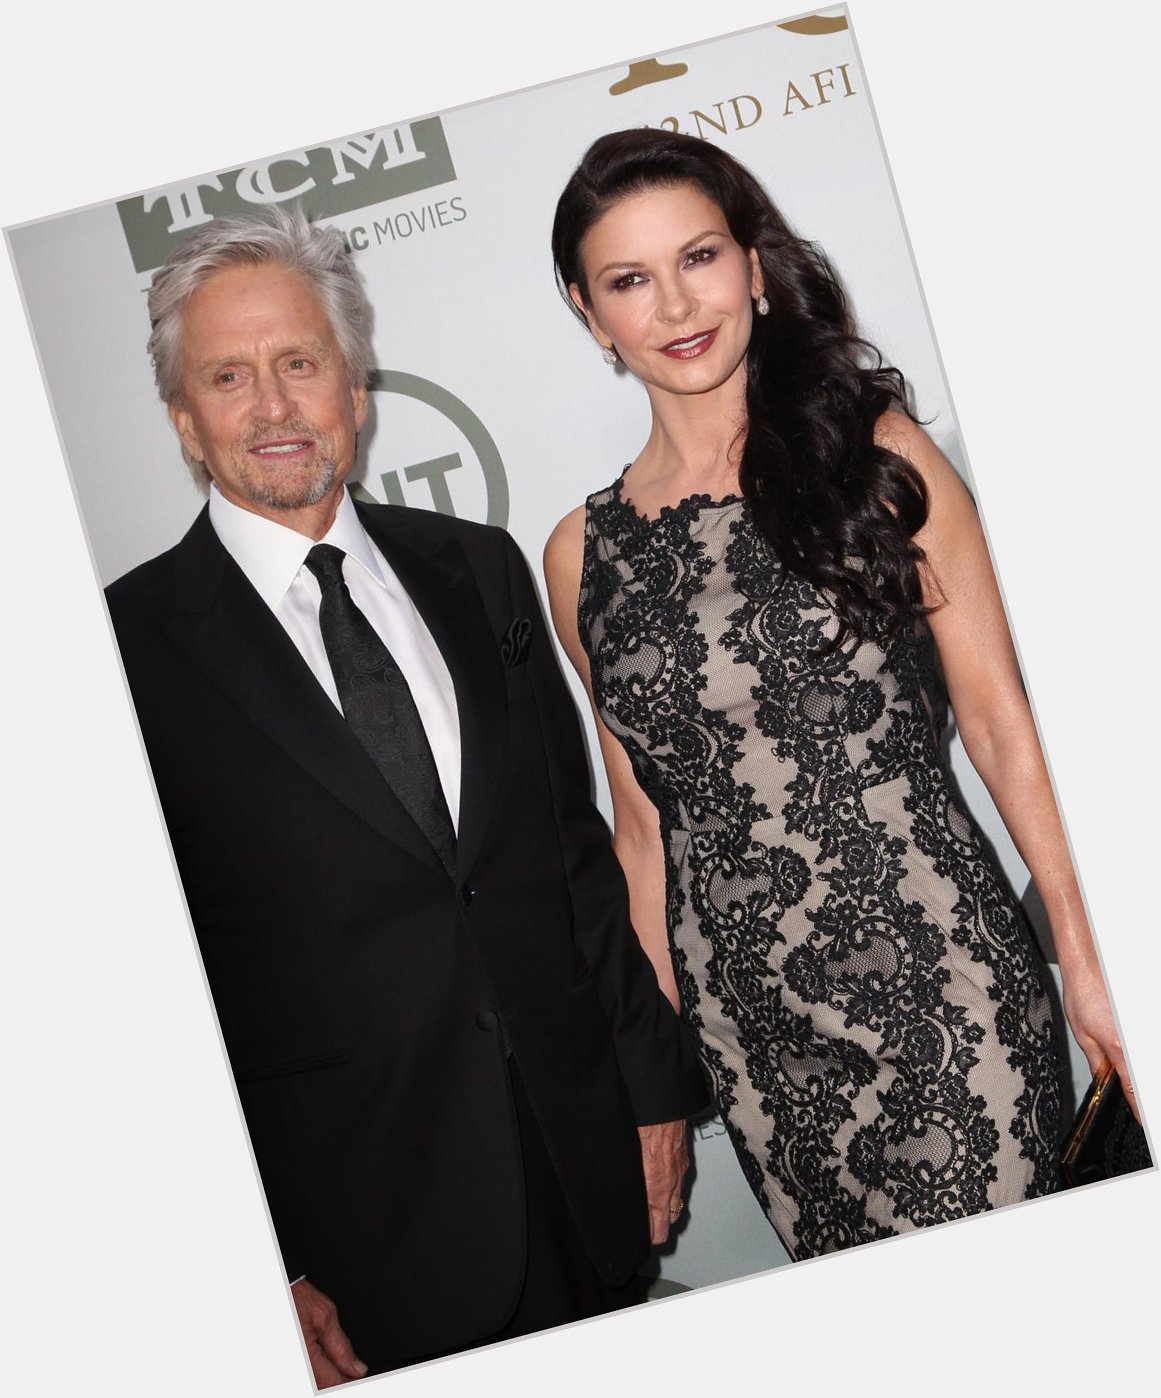 Happy bday to both Michael Douglas & Catherine Zeta-Jones...sharing a bday on the same day! How cute 